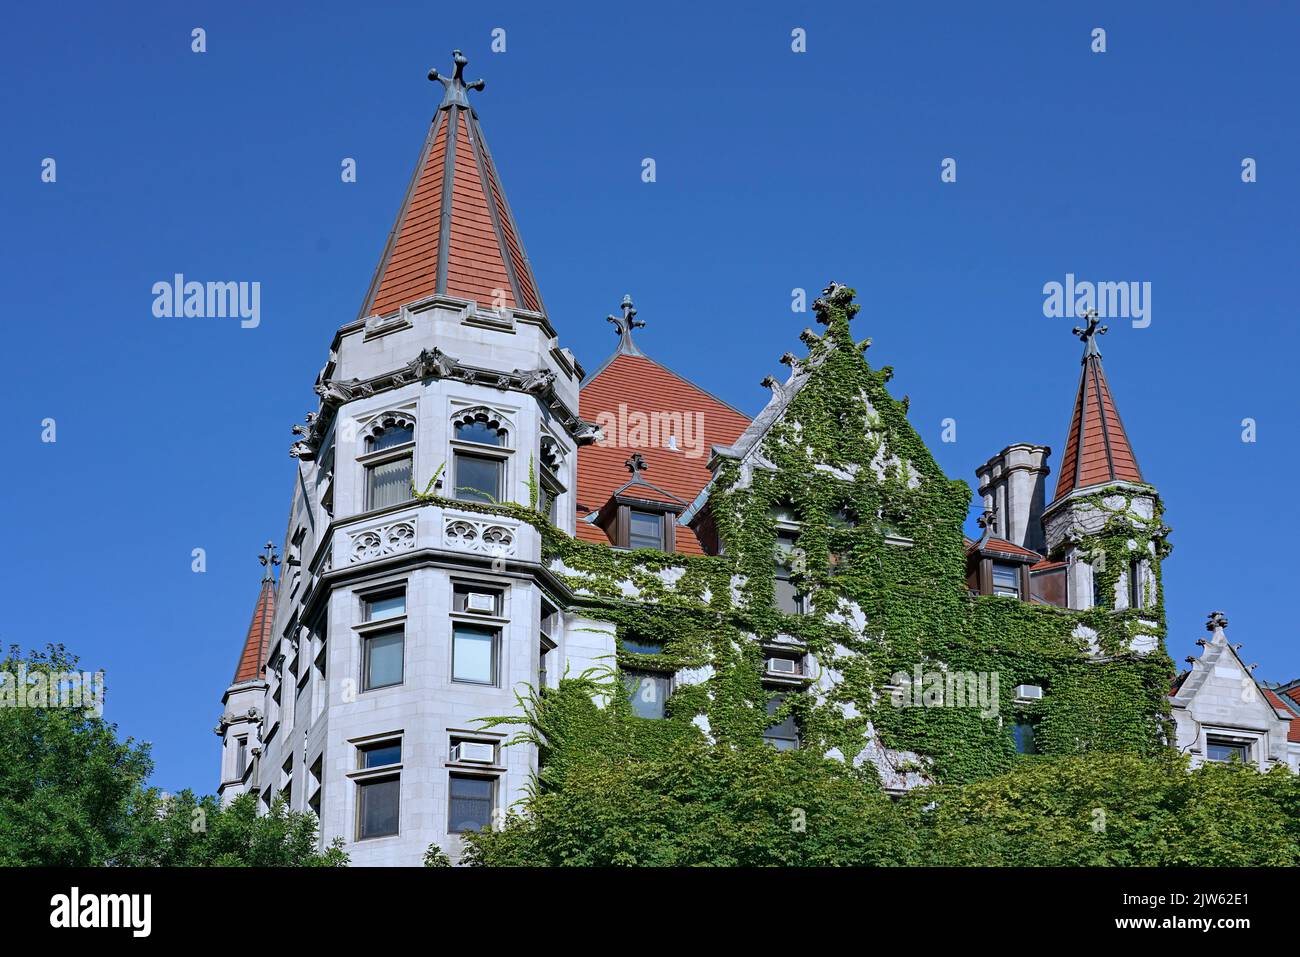 Close-up view of ivy covered college building with ornate gothic styling Stock Photo